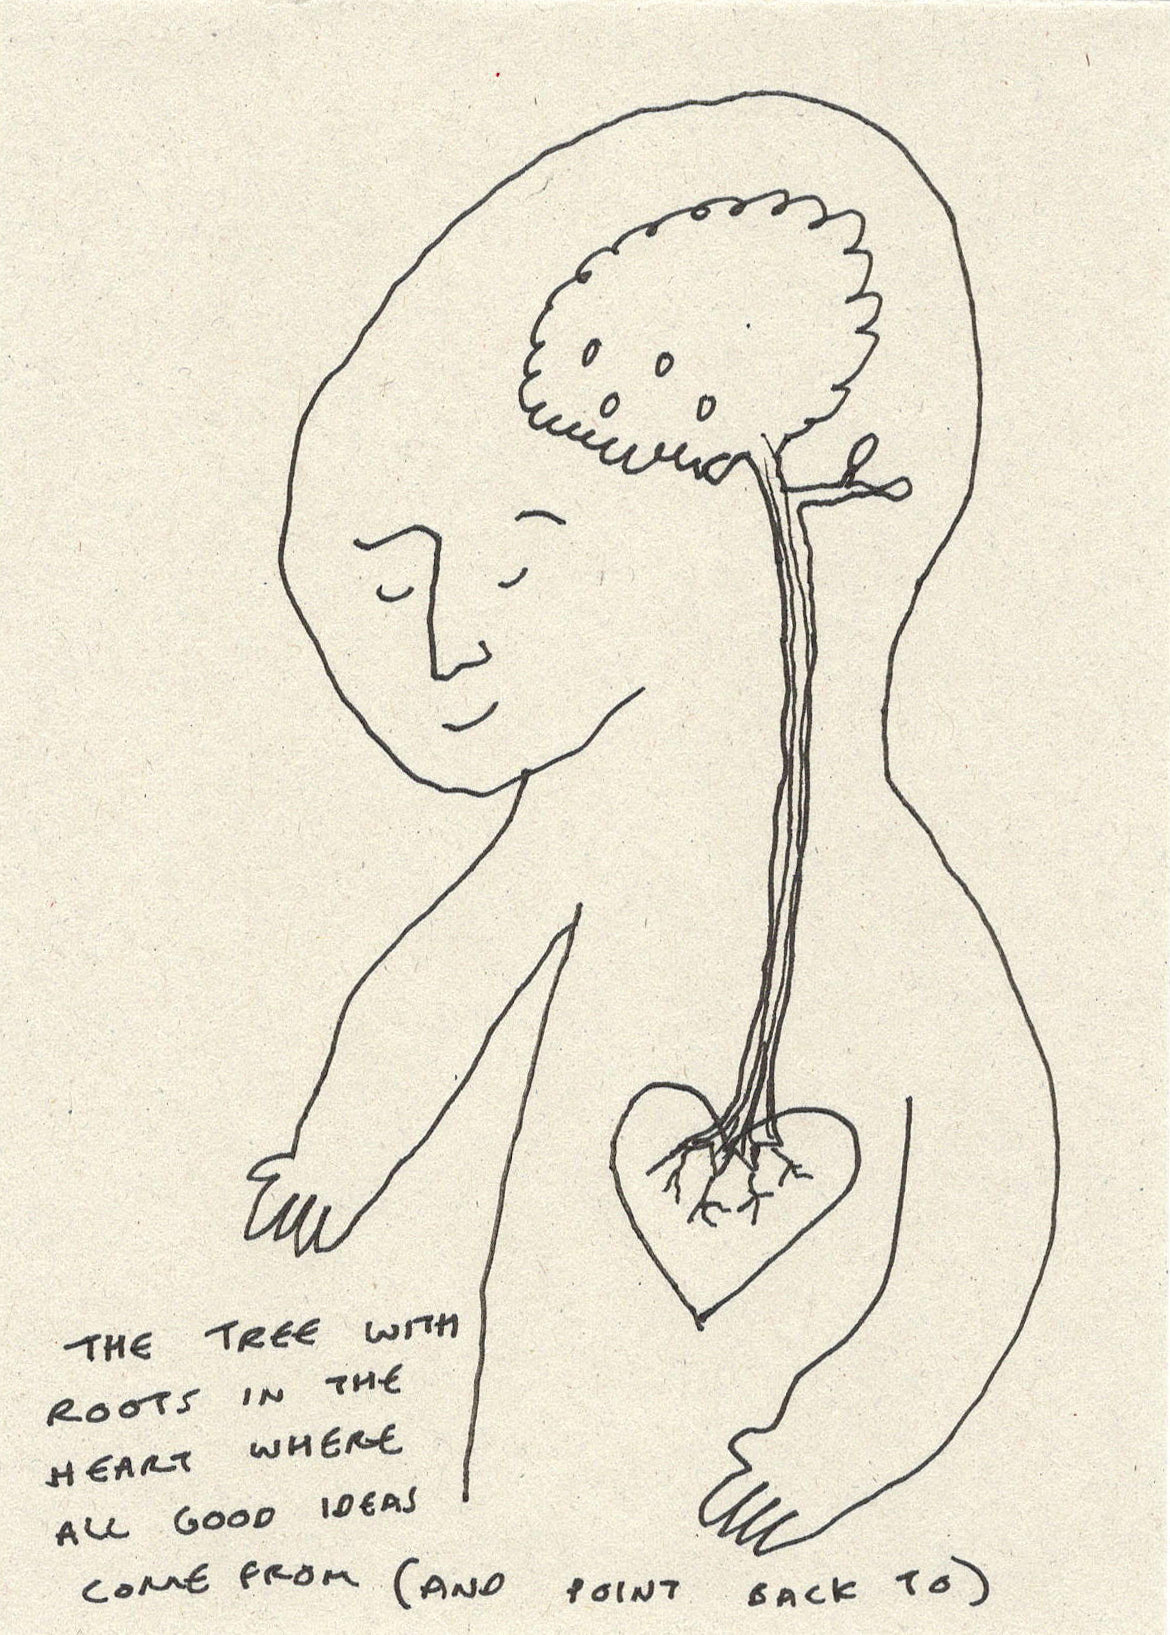 Orfeo Tagiuri - Little Passing Thoughts (Small Drawings)